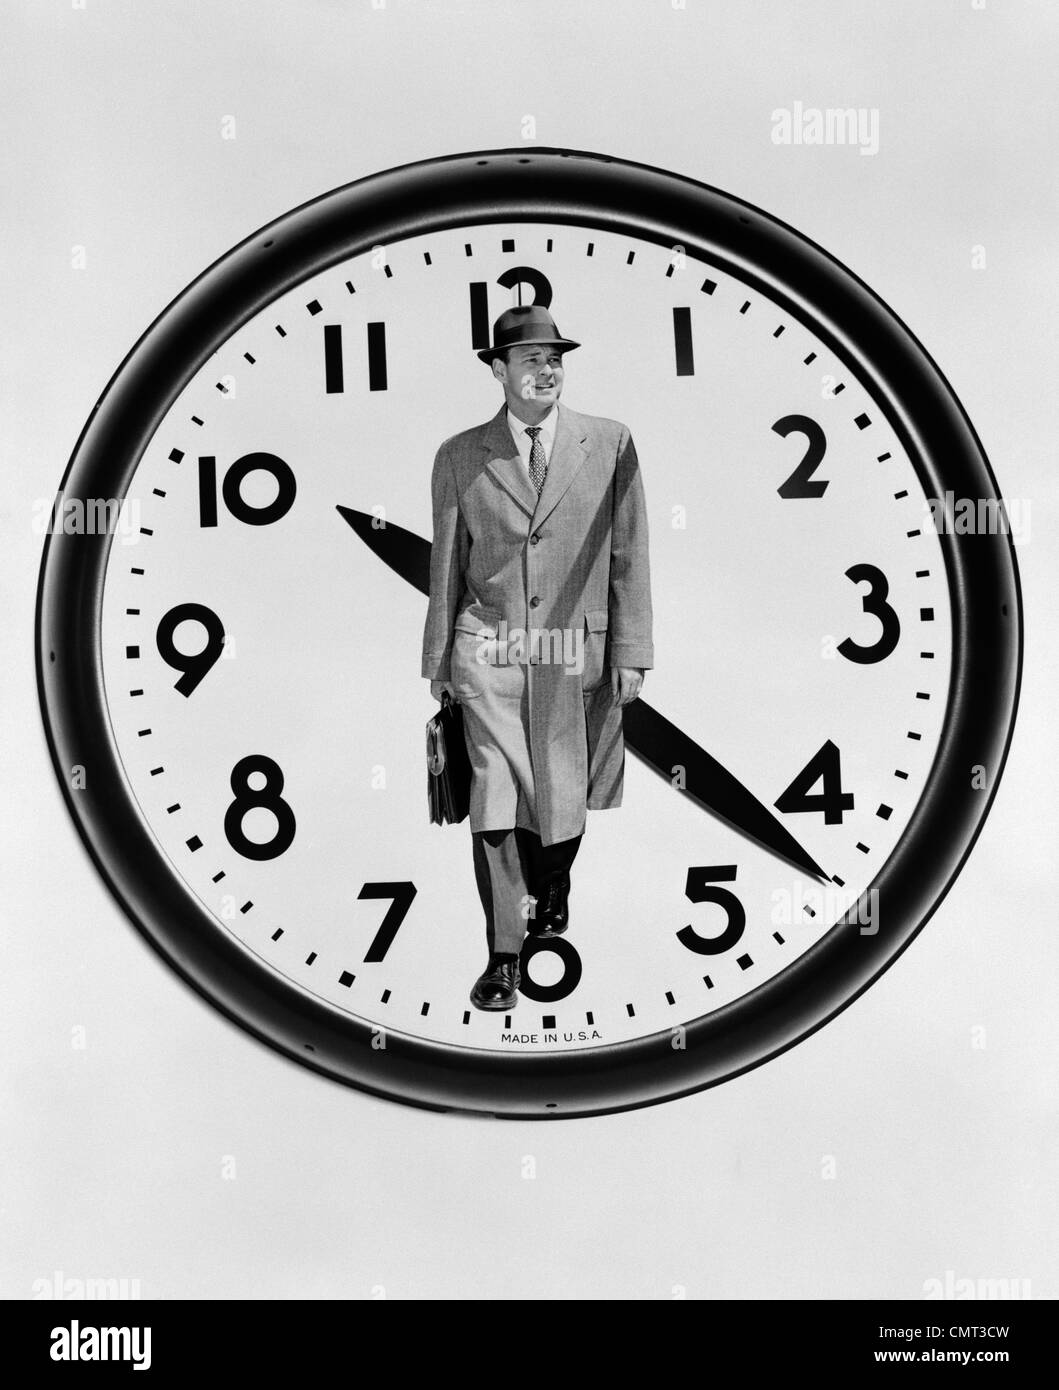 1960s 1950s MONTAGE BUSINESS MAN ON CLOCK FACE Stock Photo